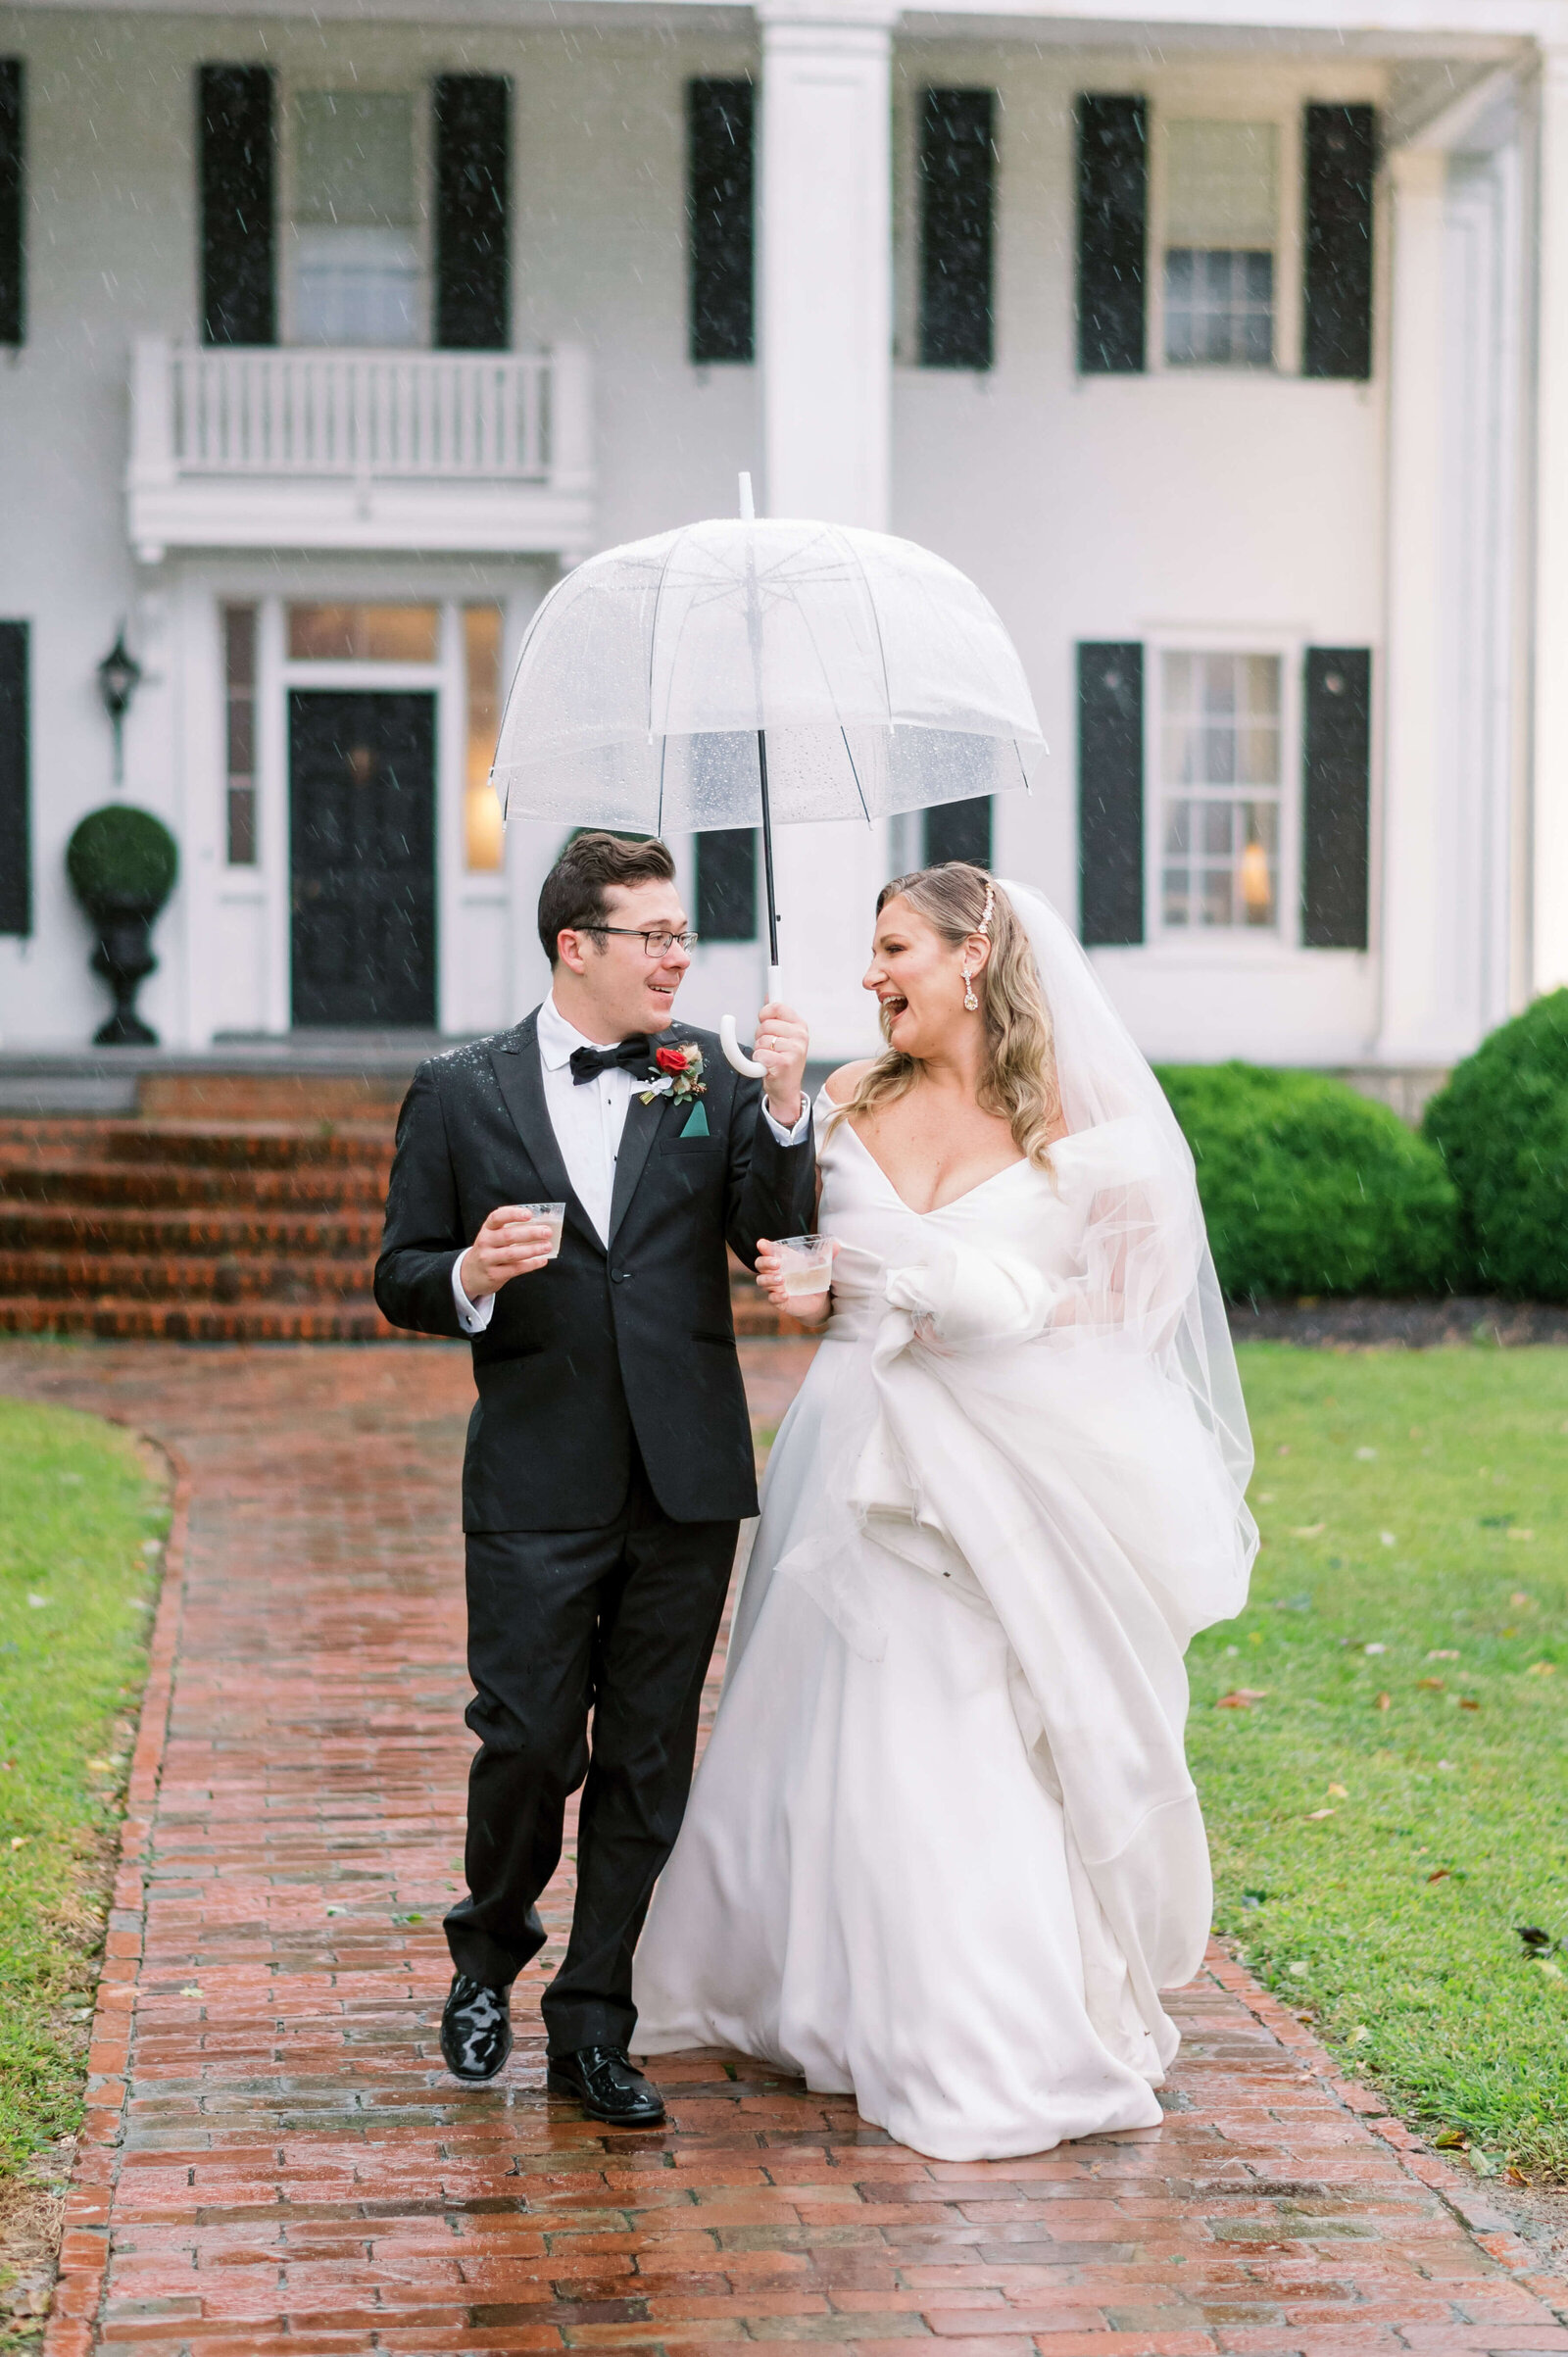 A newly married couple cheers champagne while walking together in the rain outside of a large white Virginia house